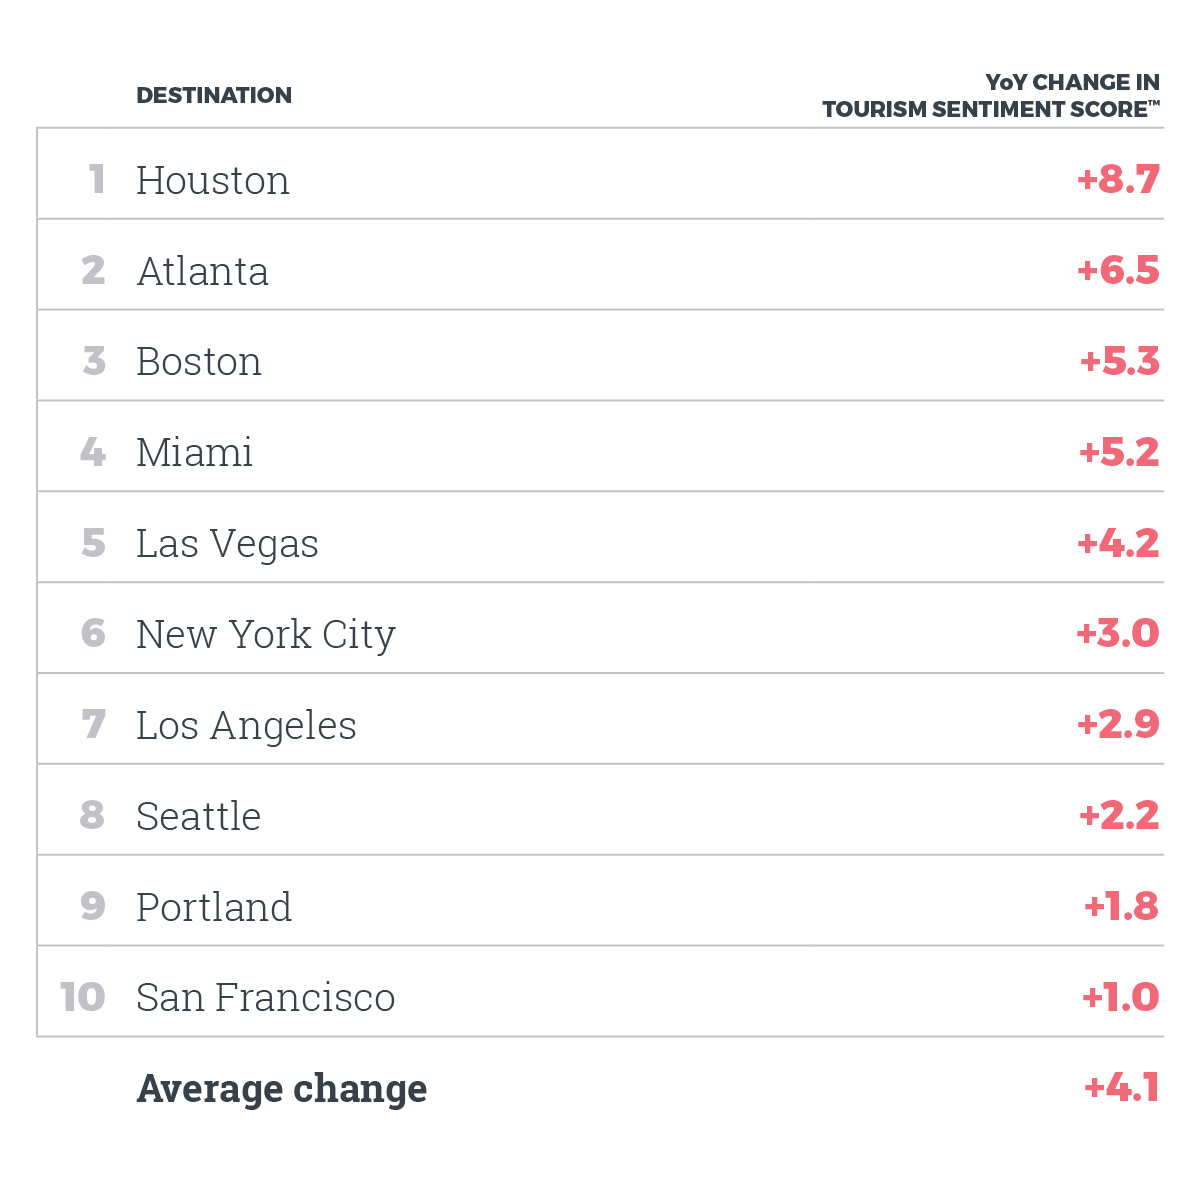 10 U.S. cities ranked according to YOY changes in Tourism Sentiment Score™.